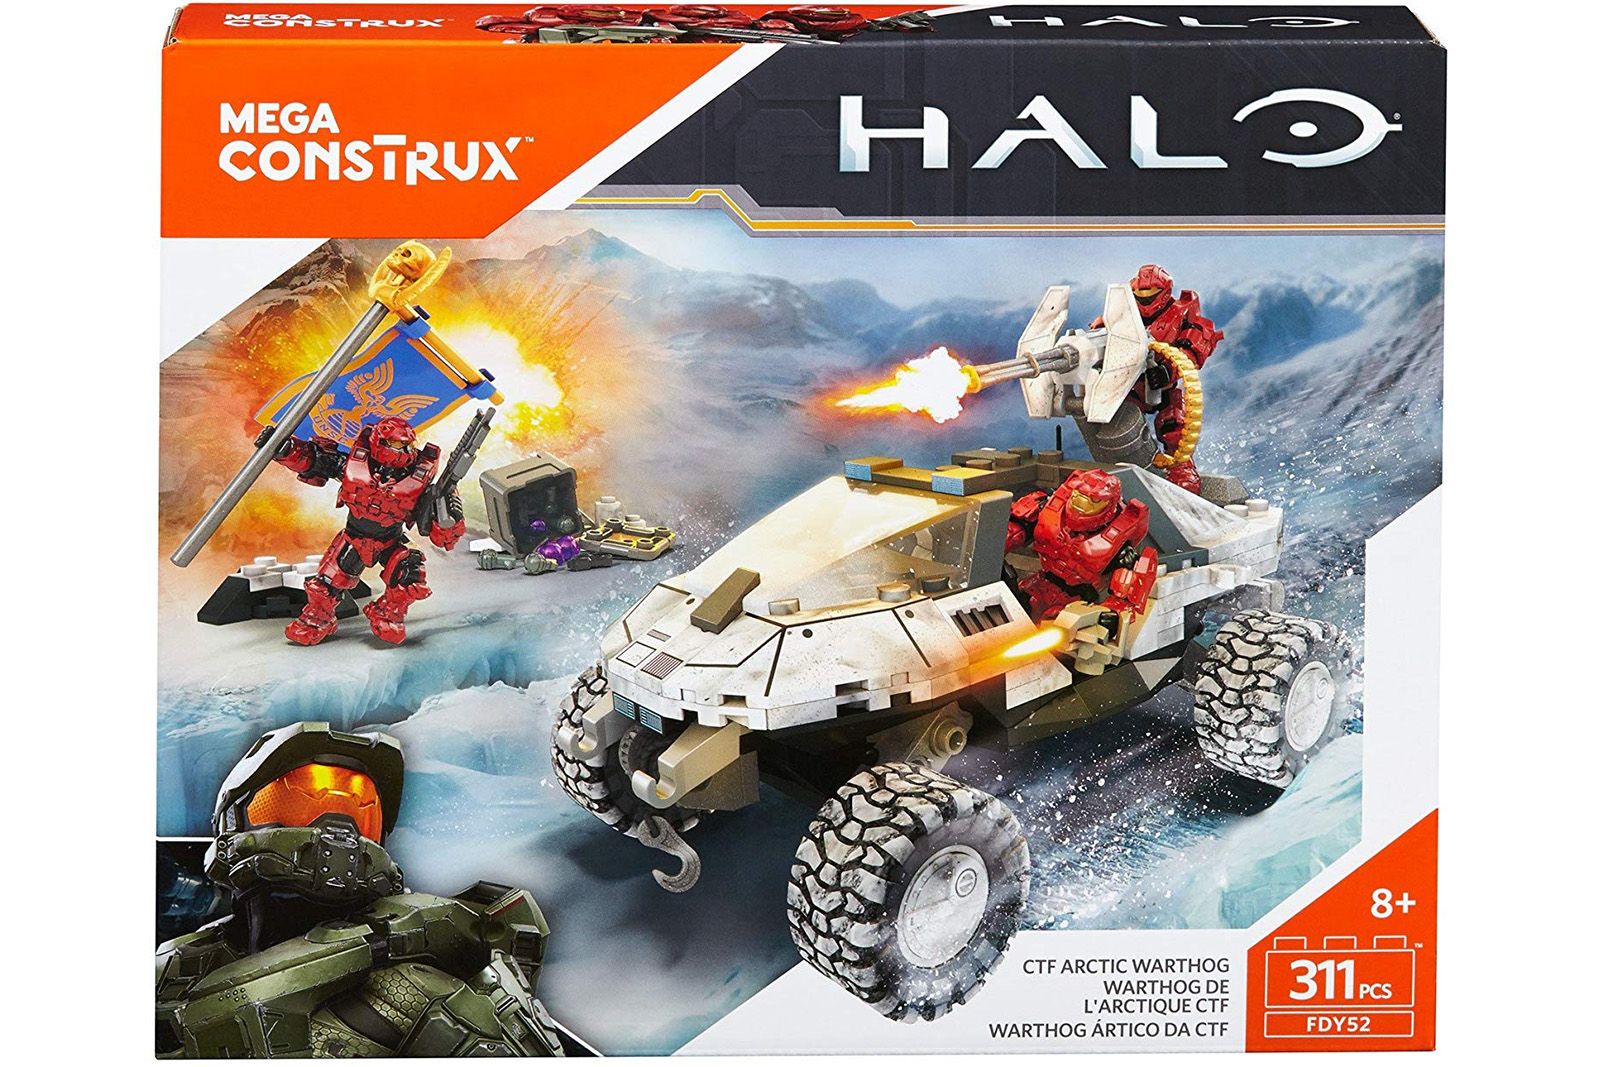 Best Lego Sets Based On Games Mario Halo Call Of Duty And More image 6